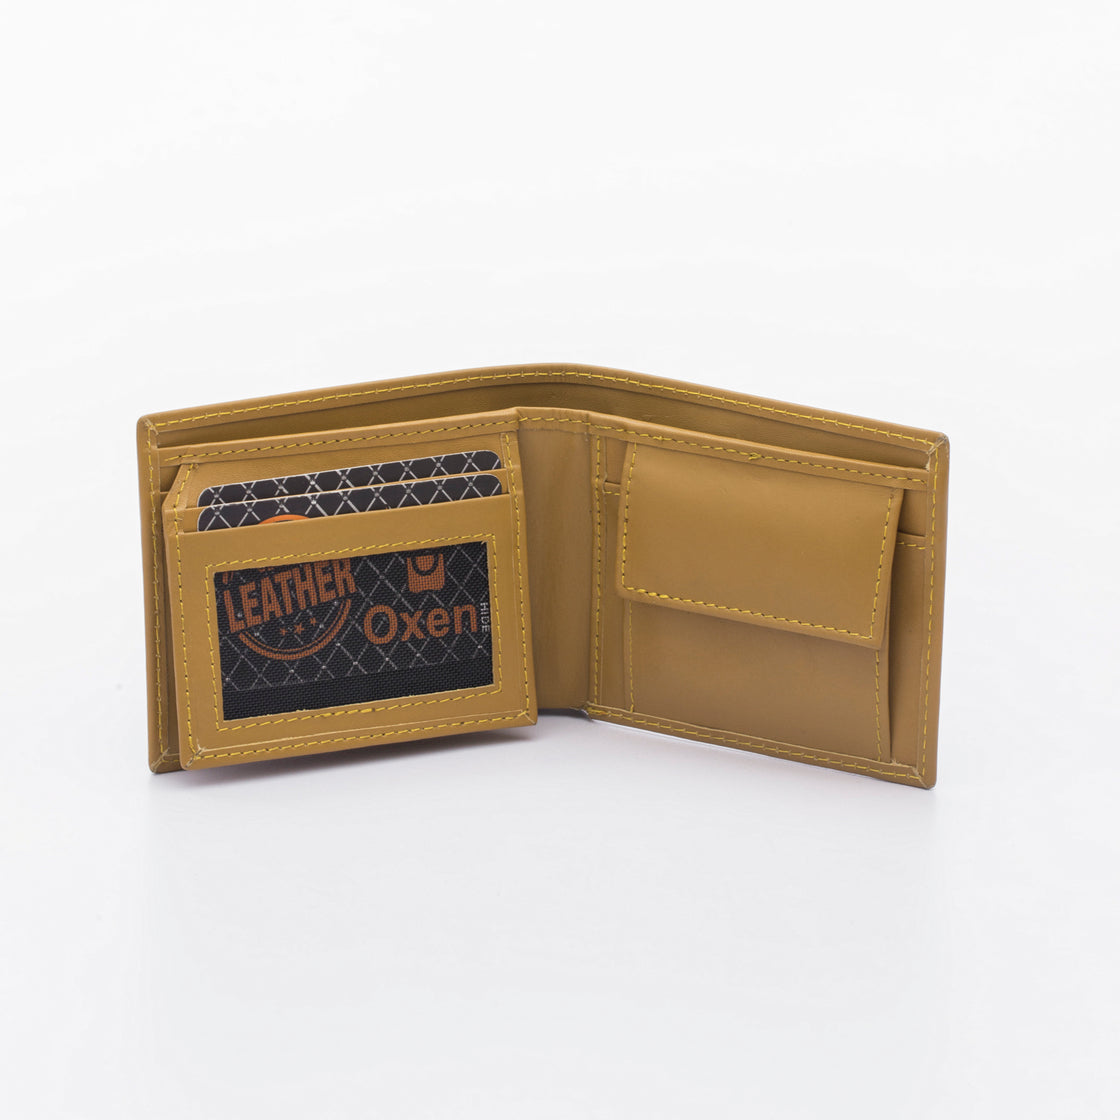 Vellox Leather Wallet